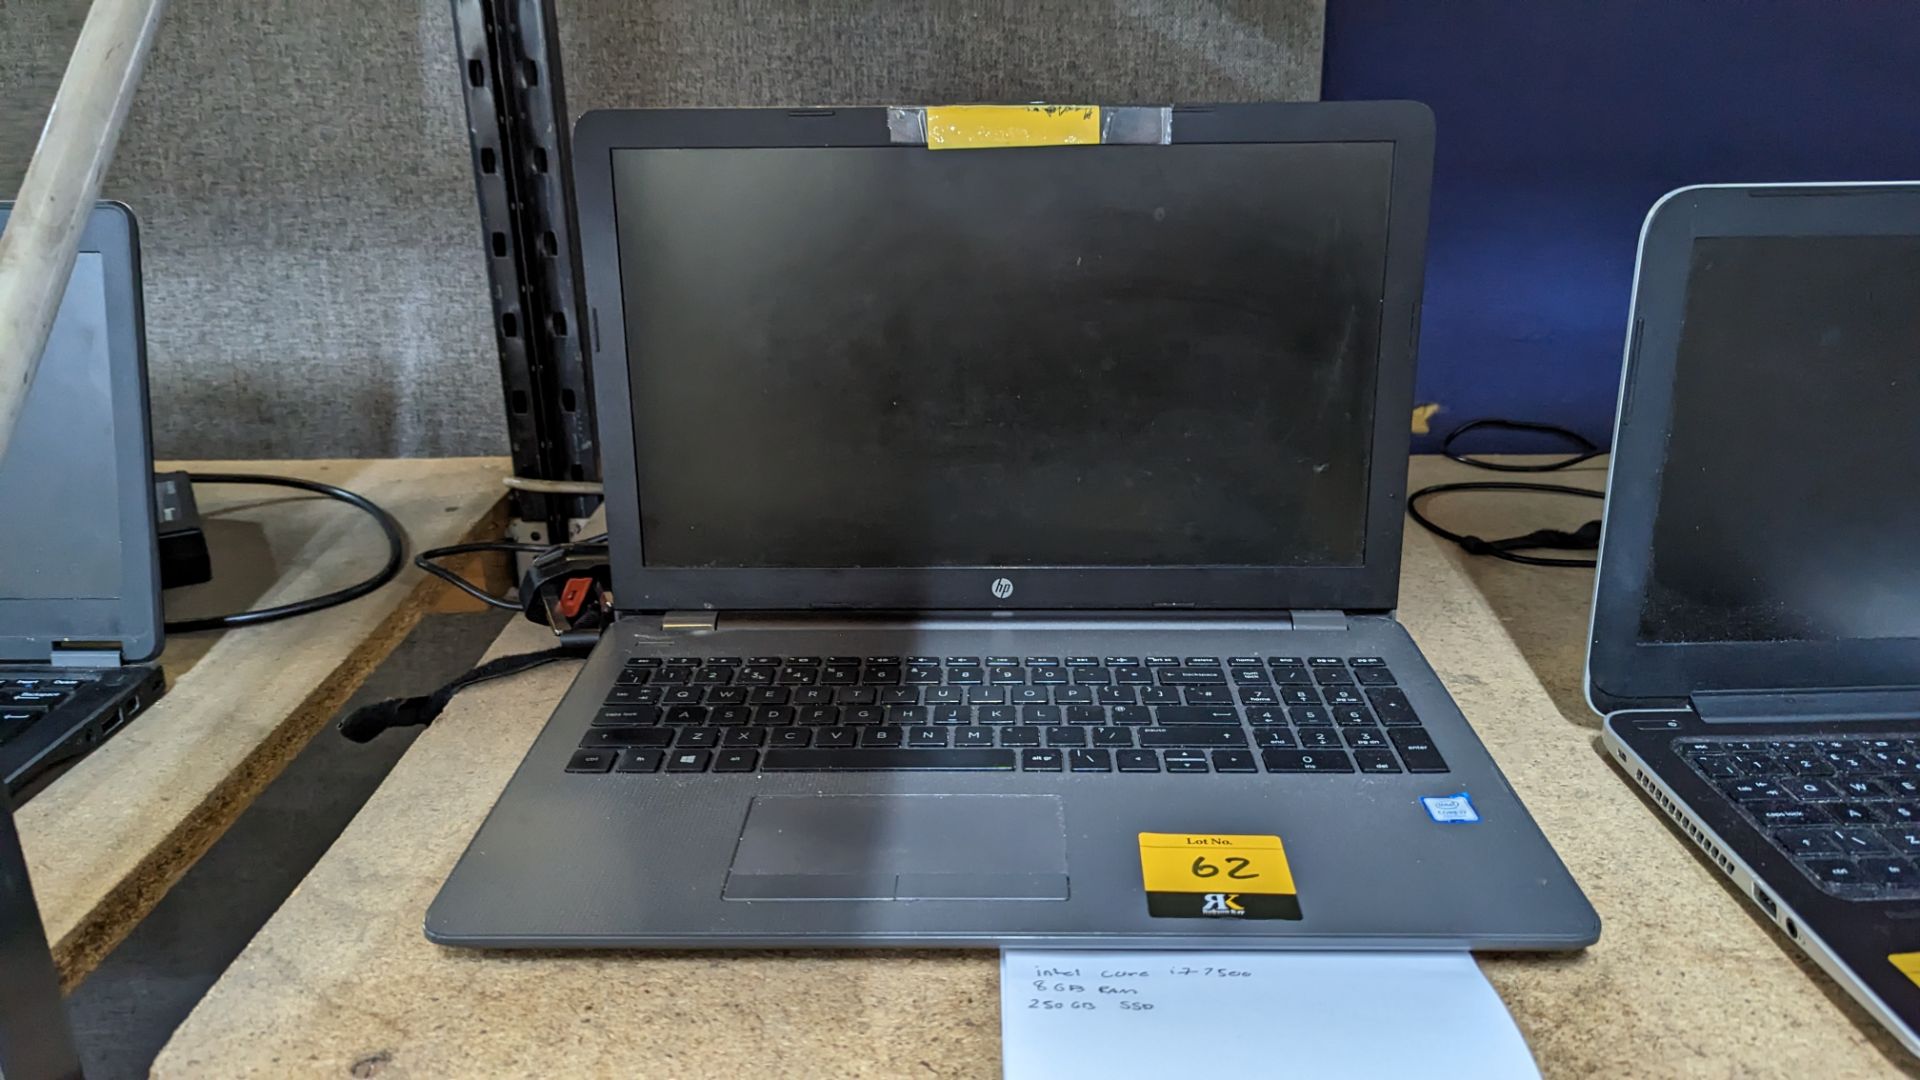 HP 250 notebook computer with Core i7-7500 CPU, 8GB RAM, 250 GB SSD, including power pack/charger